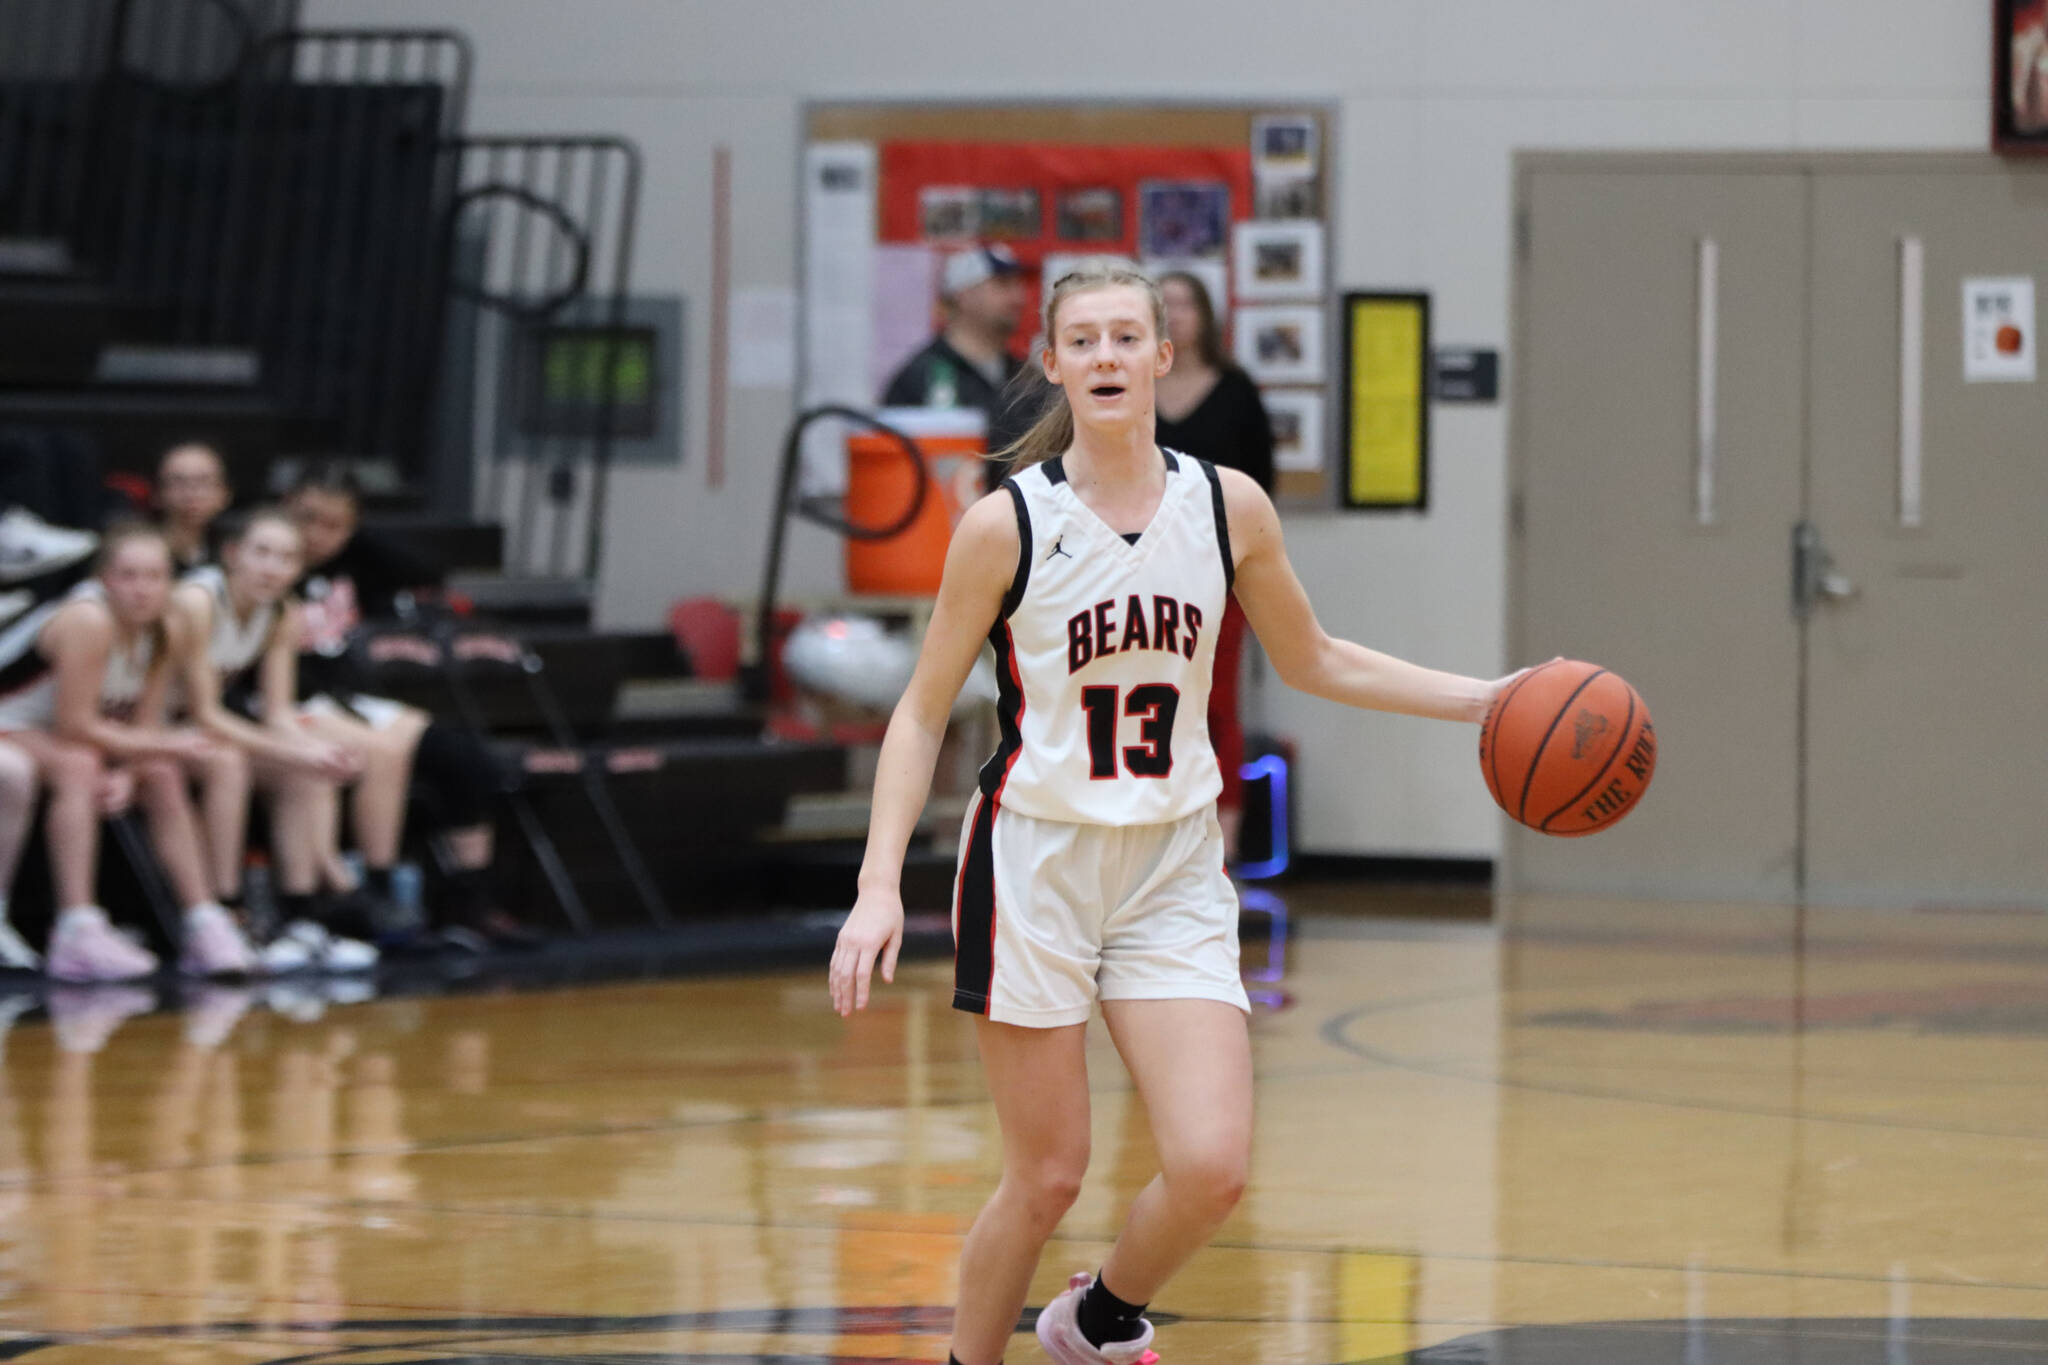 JDHS senior Skylar Tuckwood sets up the offense on Saturday against Ketchikan High School for the second game at home against the Lady Braves. Tuckwood led JDHS in scores for a total of 19 points. (Jonson Kuhn / Juneau Empire)